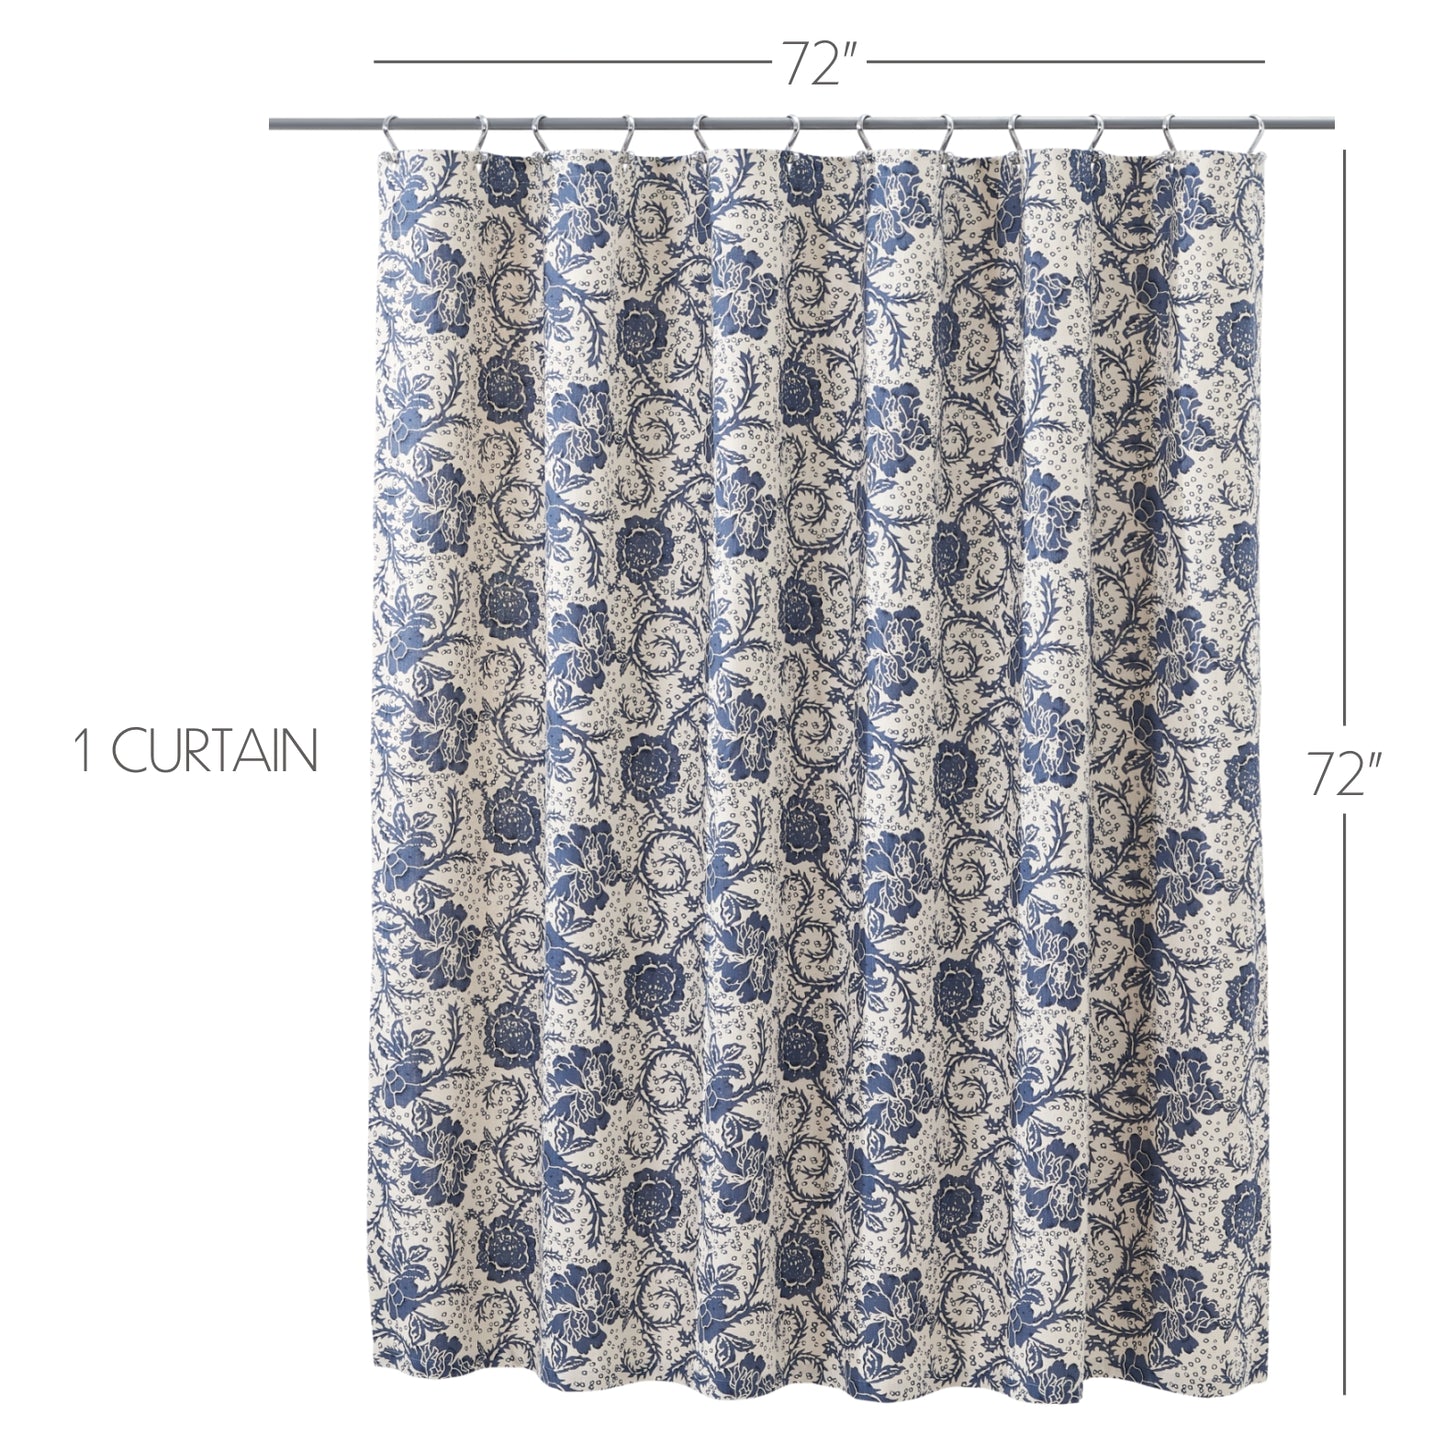 81259-Dorset-Navy-Floral-Shower-Curtain-72x72-image-1